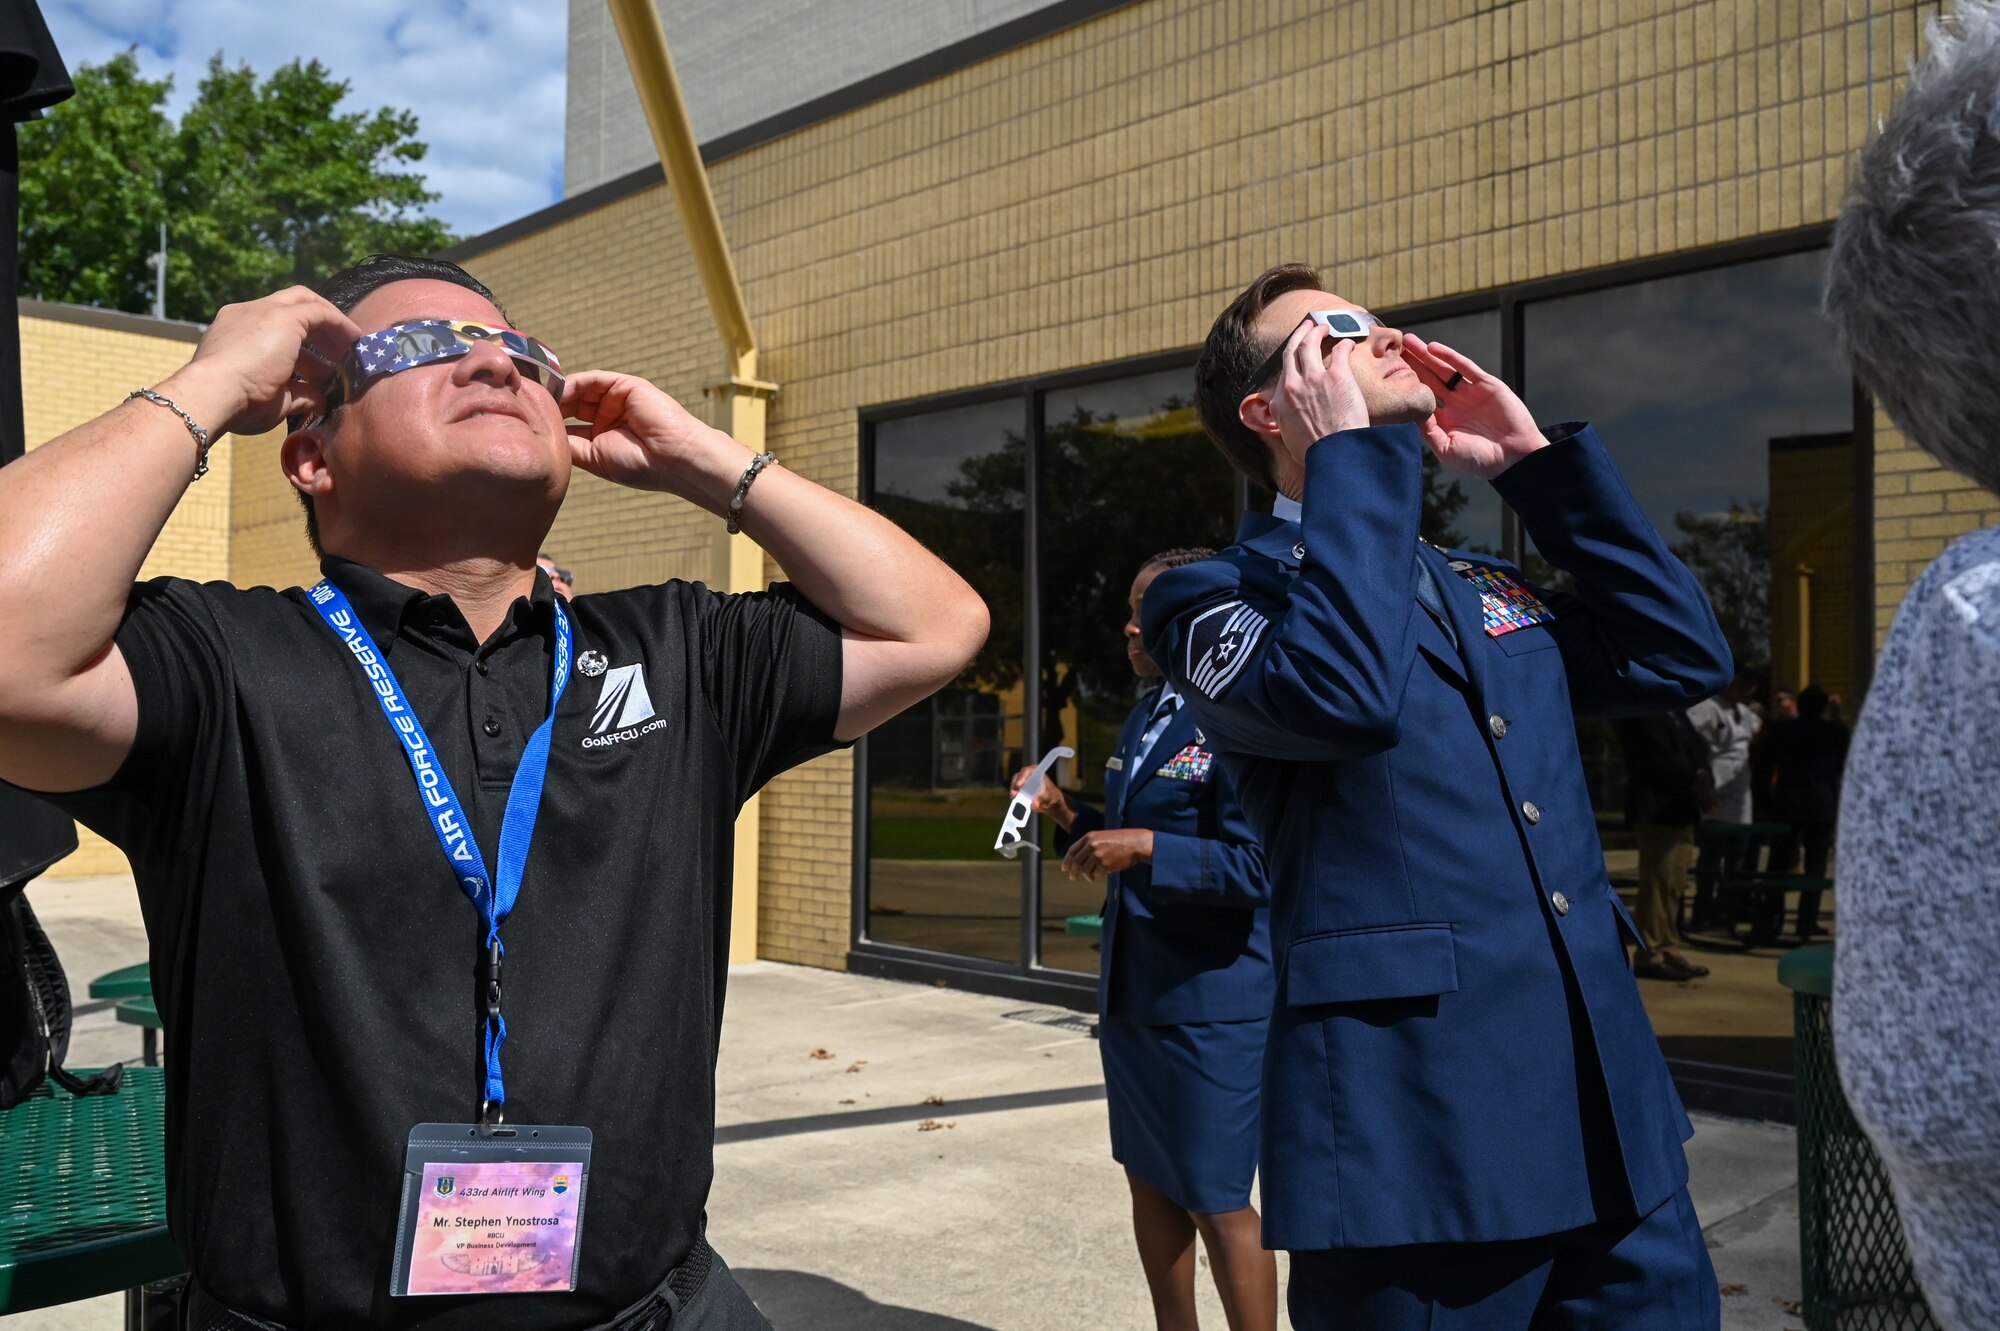 Stephen Ynostrosa, Randolph Brooks Federal Credit Union vice president of business development, and Master Sgt. Michael Lahrman, 433rd Airlift Wing Public Affairs non-commissioned officer in charge of media operations, view the solar eclipse event after the Honorary Commanders’ Induction Ceremony on Joint Base San Antonio-Lackland Texas, Oct. 15, 2023. Special solar eclipse glasses were provided to attendees in order to partake in the solar eclipse event after the induction ceremony. (U.S. Air Force photo by Staff Sgt. Adriana Barrientos)